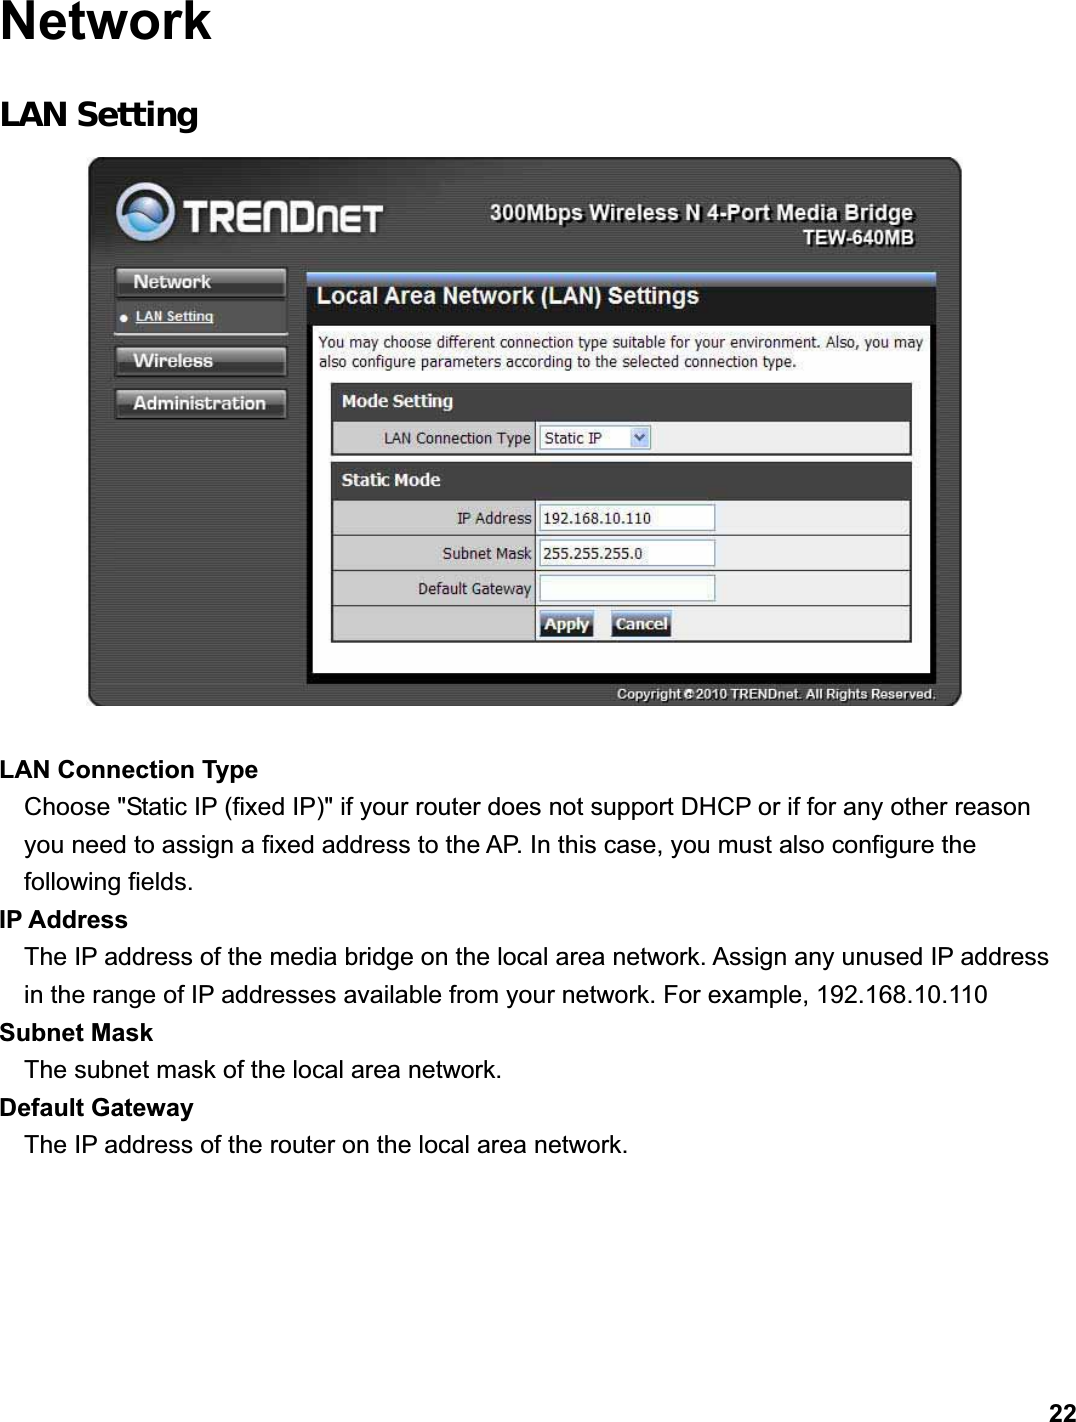      22NetworkLAN Setting LAN Connection Type Choose &quot;Static IP (fixed IP)&quot; if your router does not support DHCP or if for any other reason you need to assign a fixed address to the AP. In this case, you must also configure the following fields.   IP Address   The IP address of the media bridge on the local area network. Assign any unused IP address in the range of IP addresses available from your network. For example, 192.168.10.110 Subnet Mask   The subnet mask of the local area network.   Default Gateway   The IP address of the router on the local area network.   